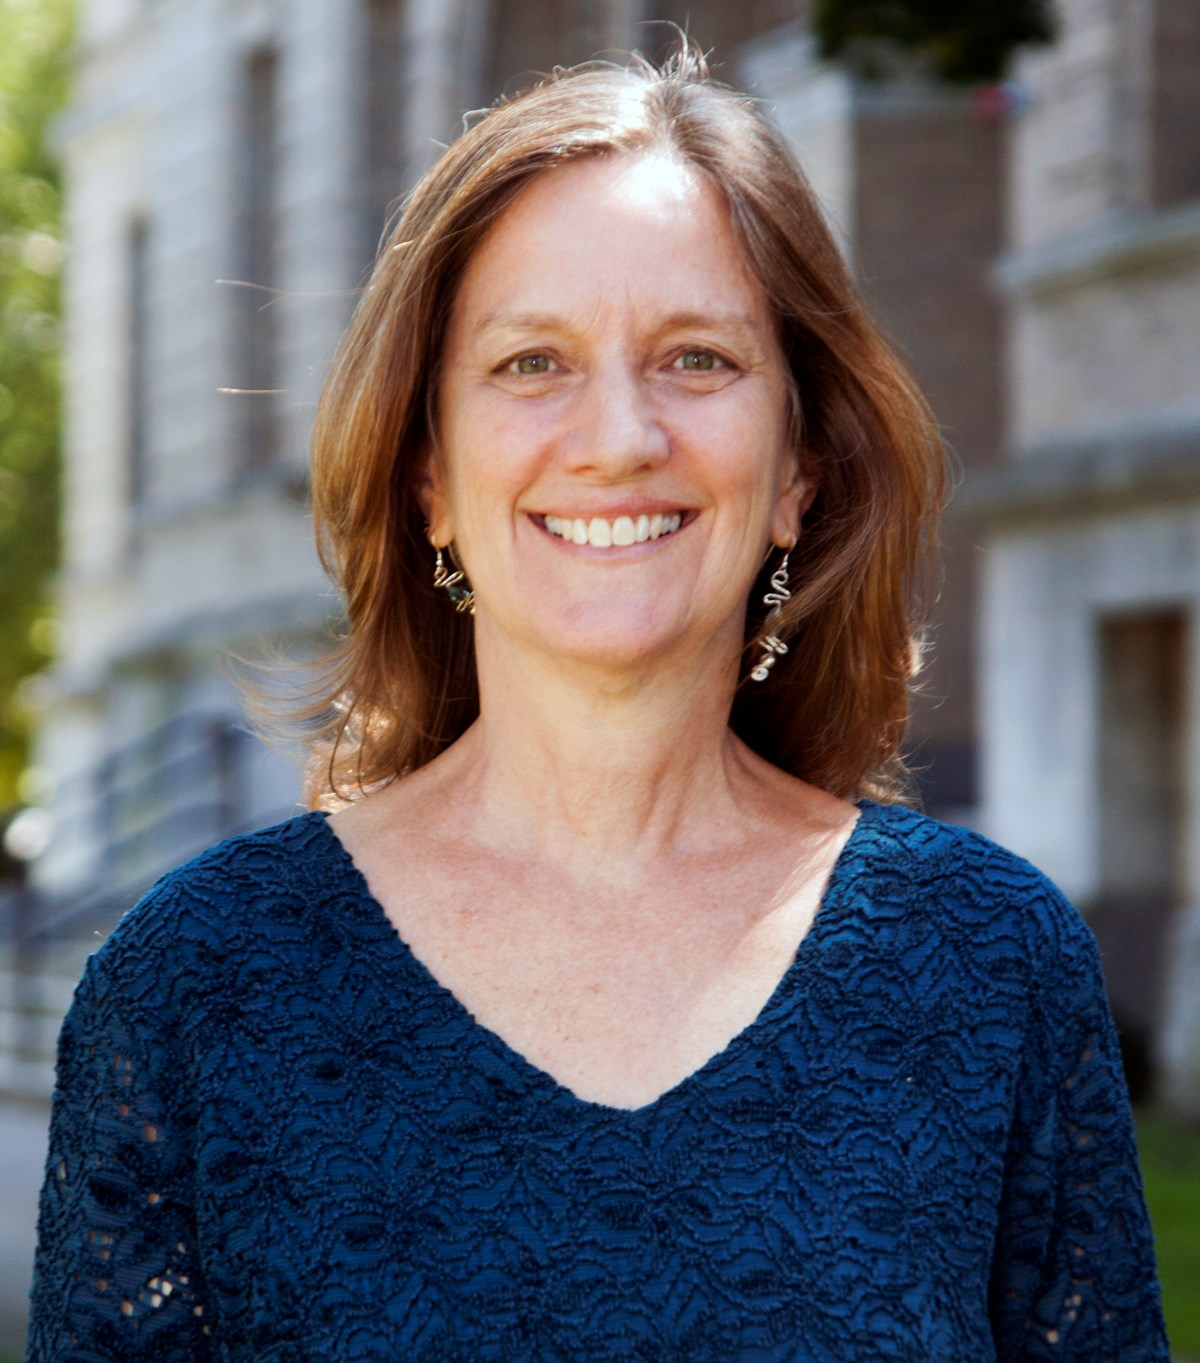 Meg Bond is Professor in the Psychology Department an, Director of the Center for Women & Work at UMass Lowell.